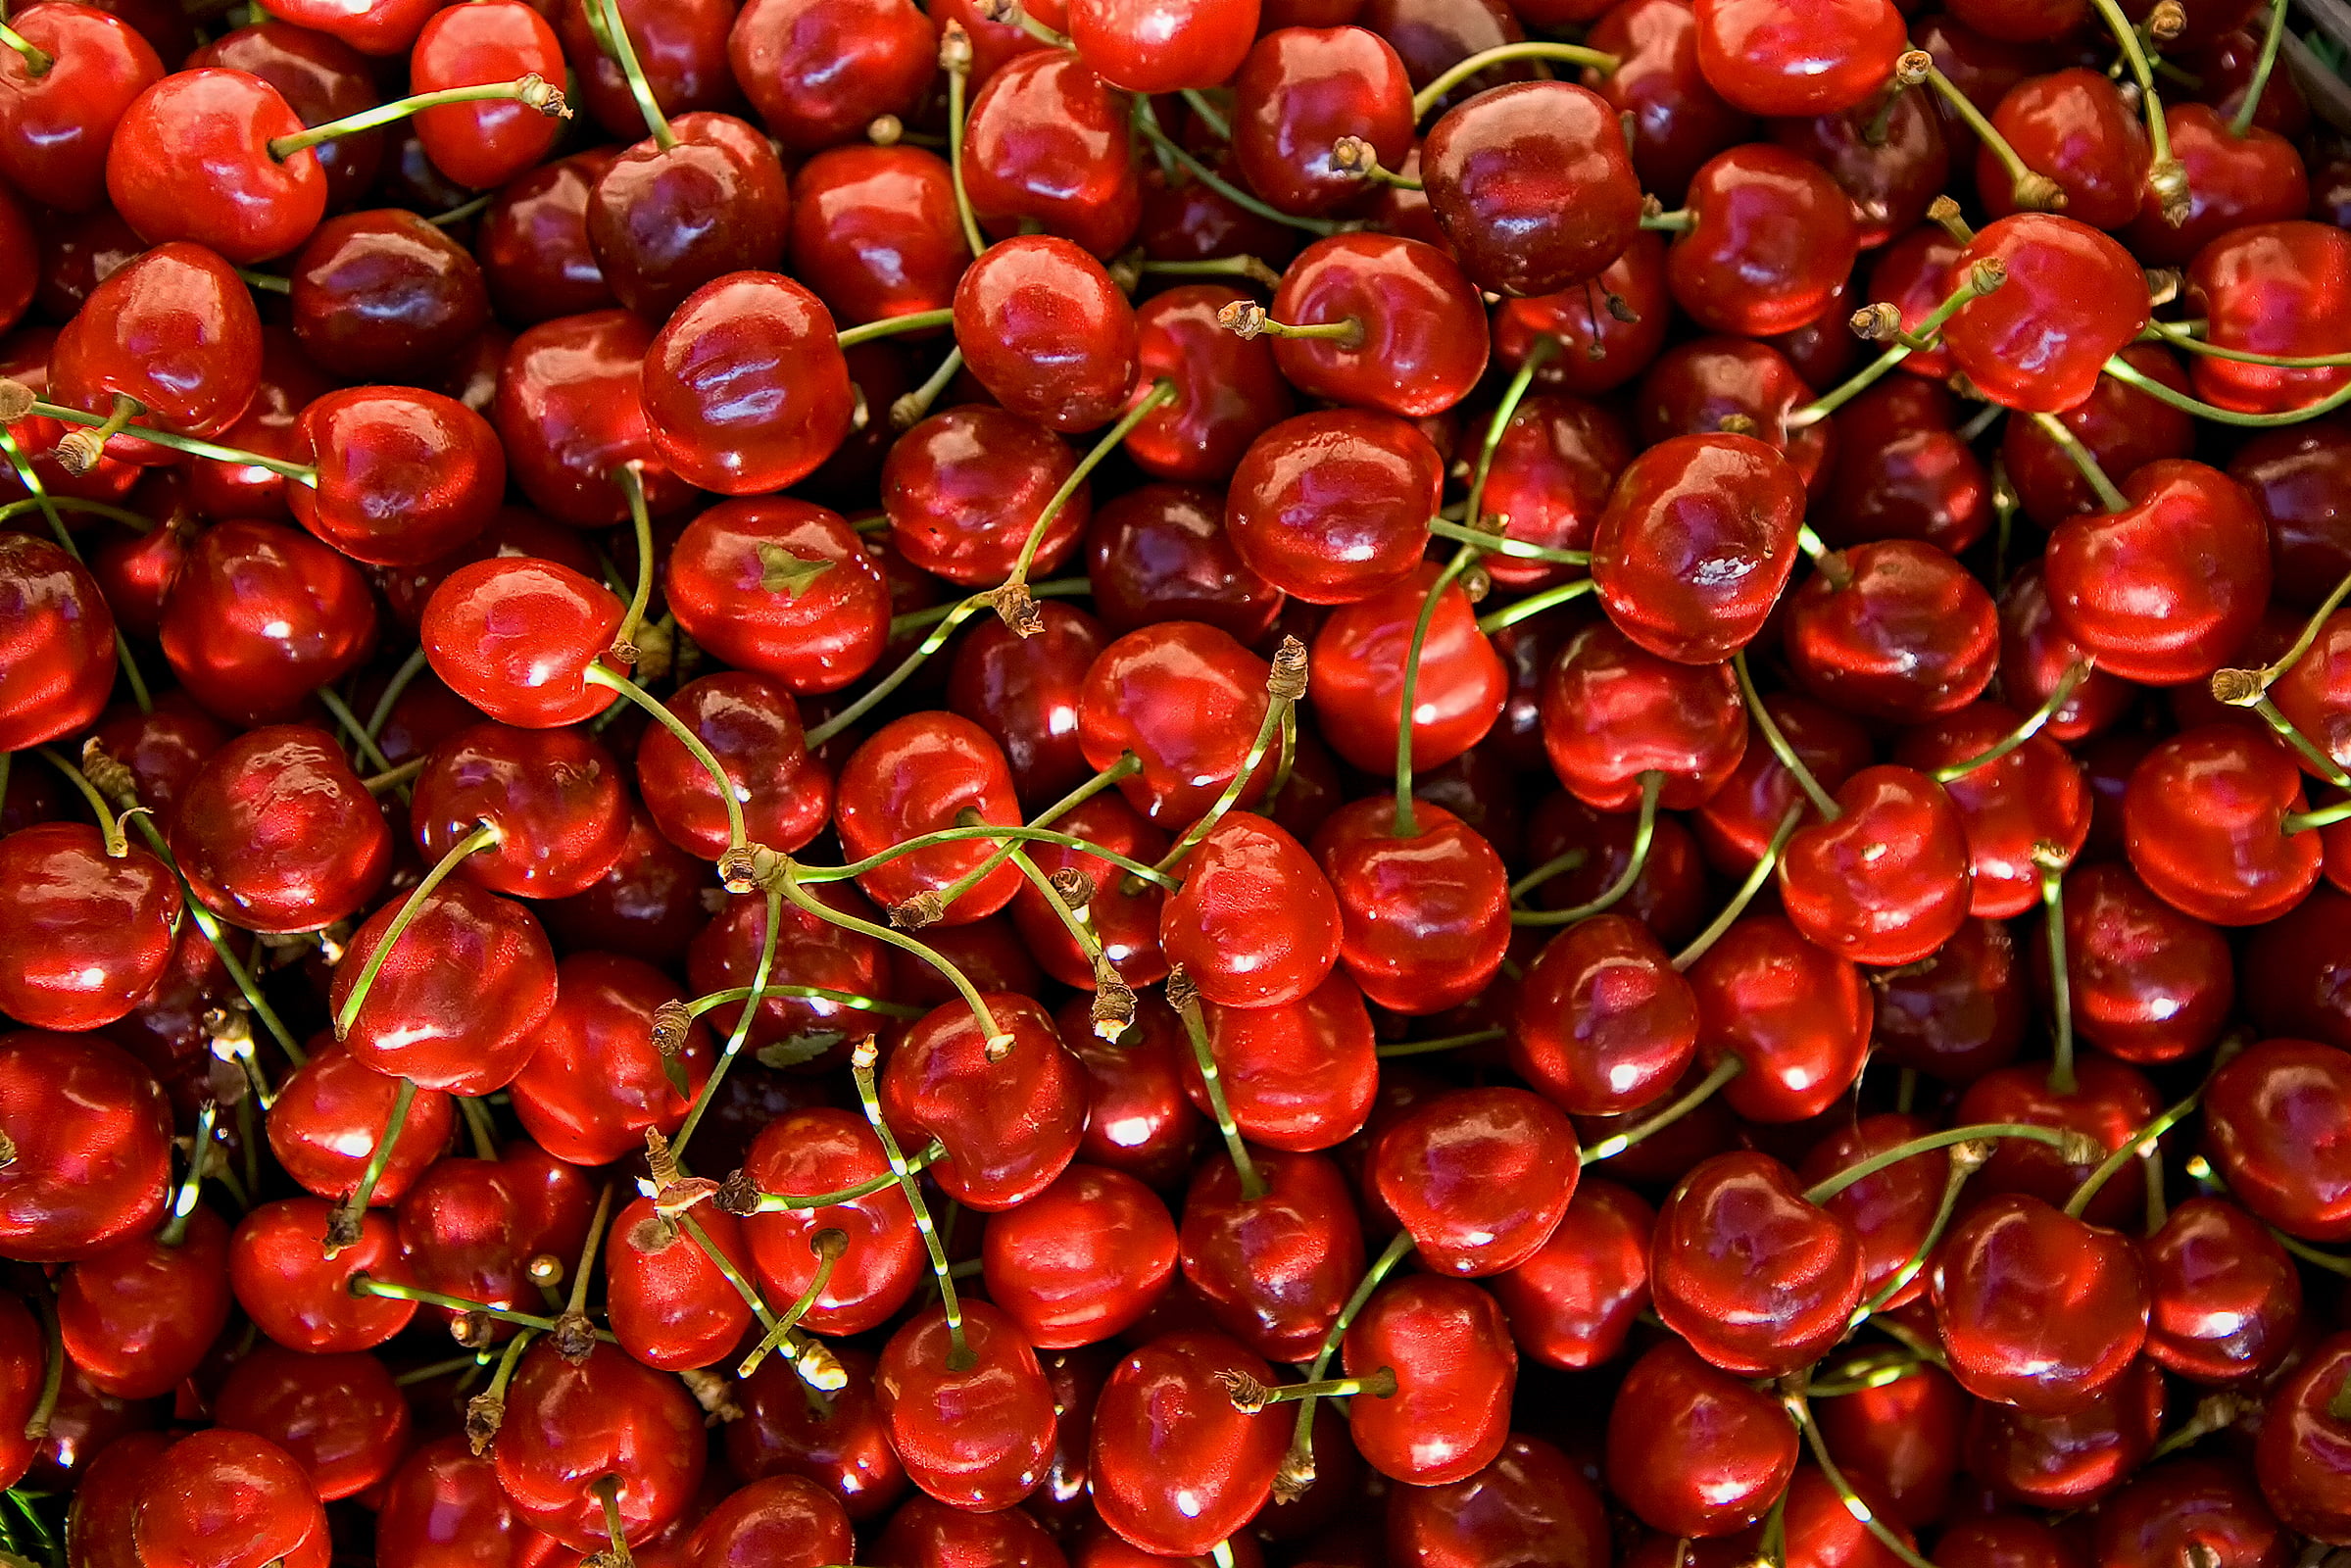 red cherry fruit lot